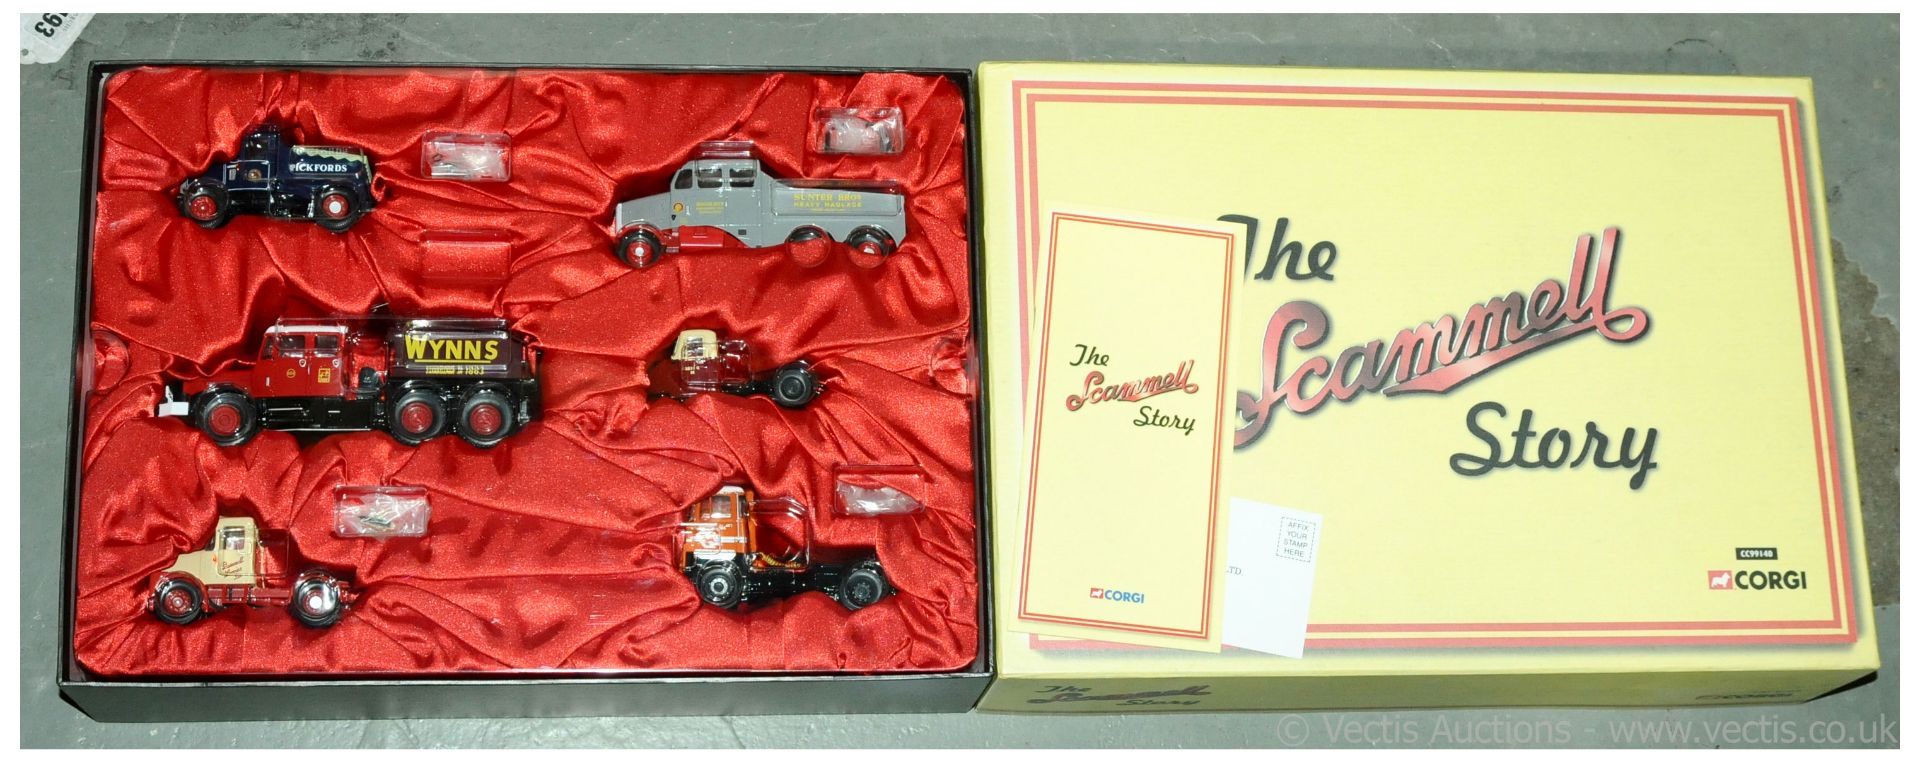 Corgi boxed 1/50th scale set "The Scammell